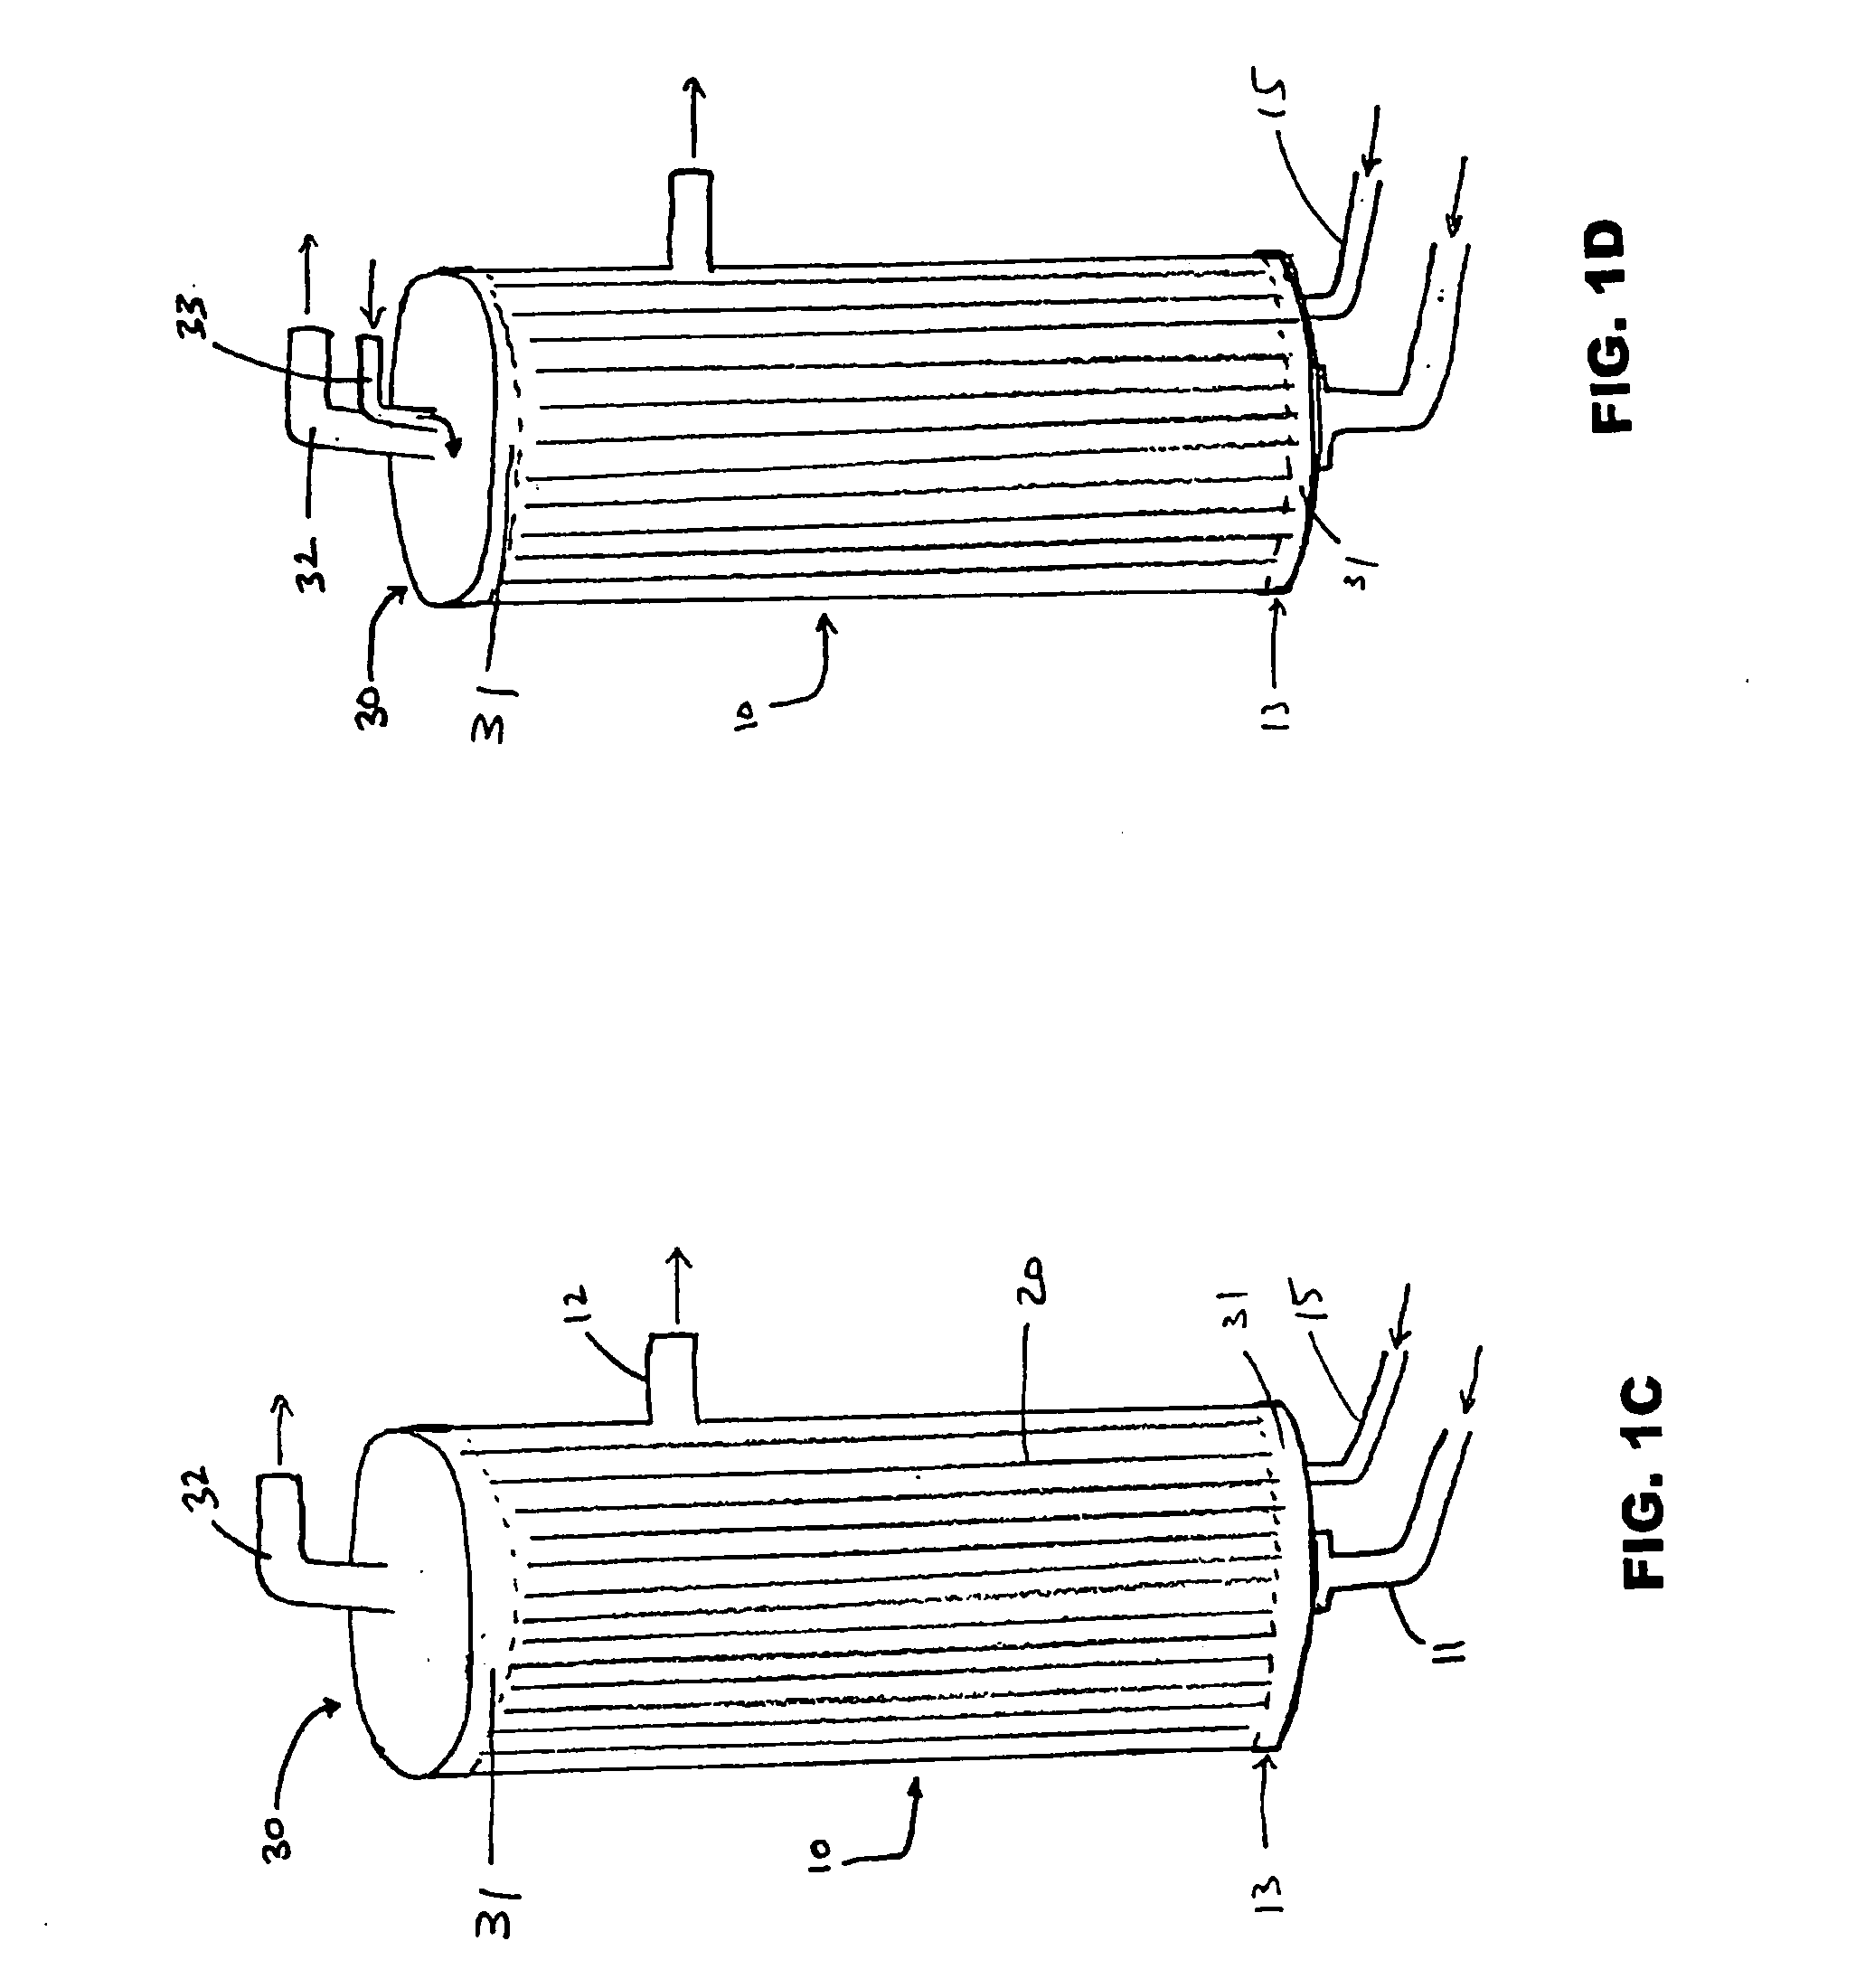 Hemodilution cap and methods of use in blood-processing procedures